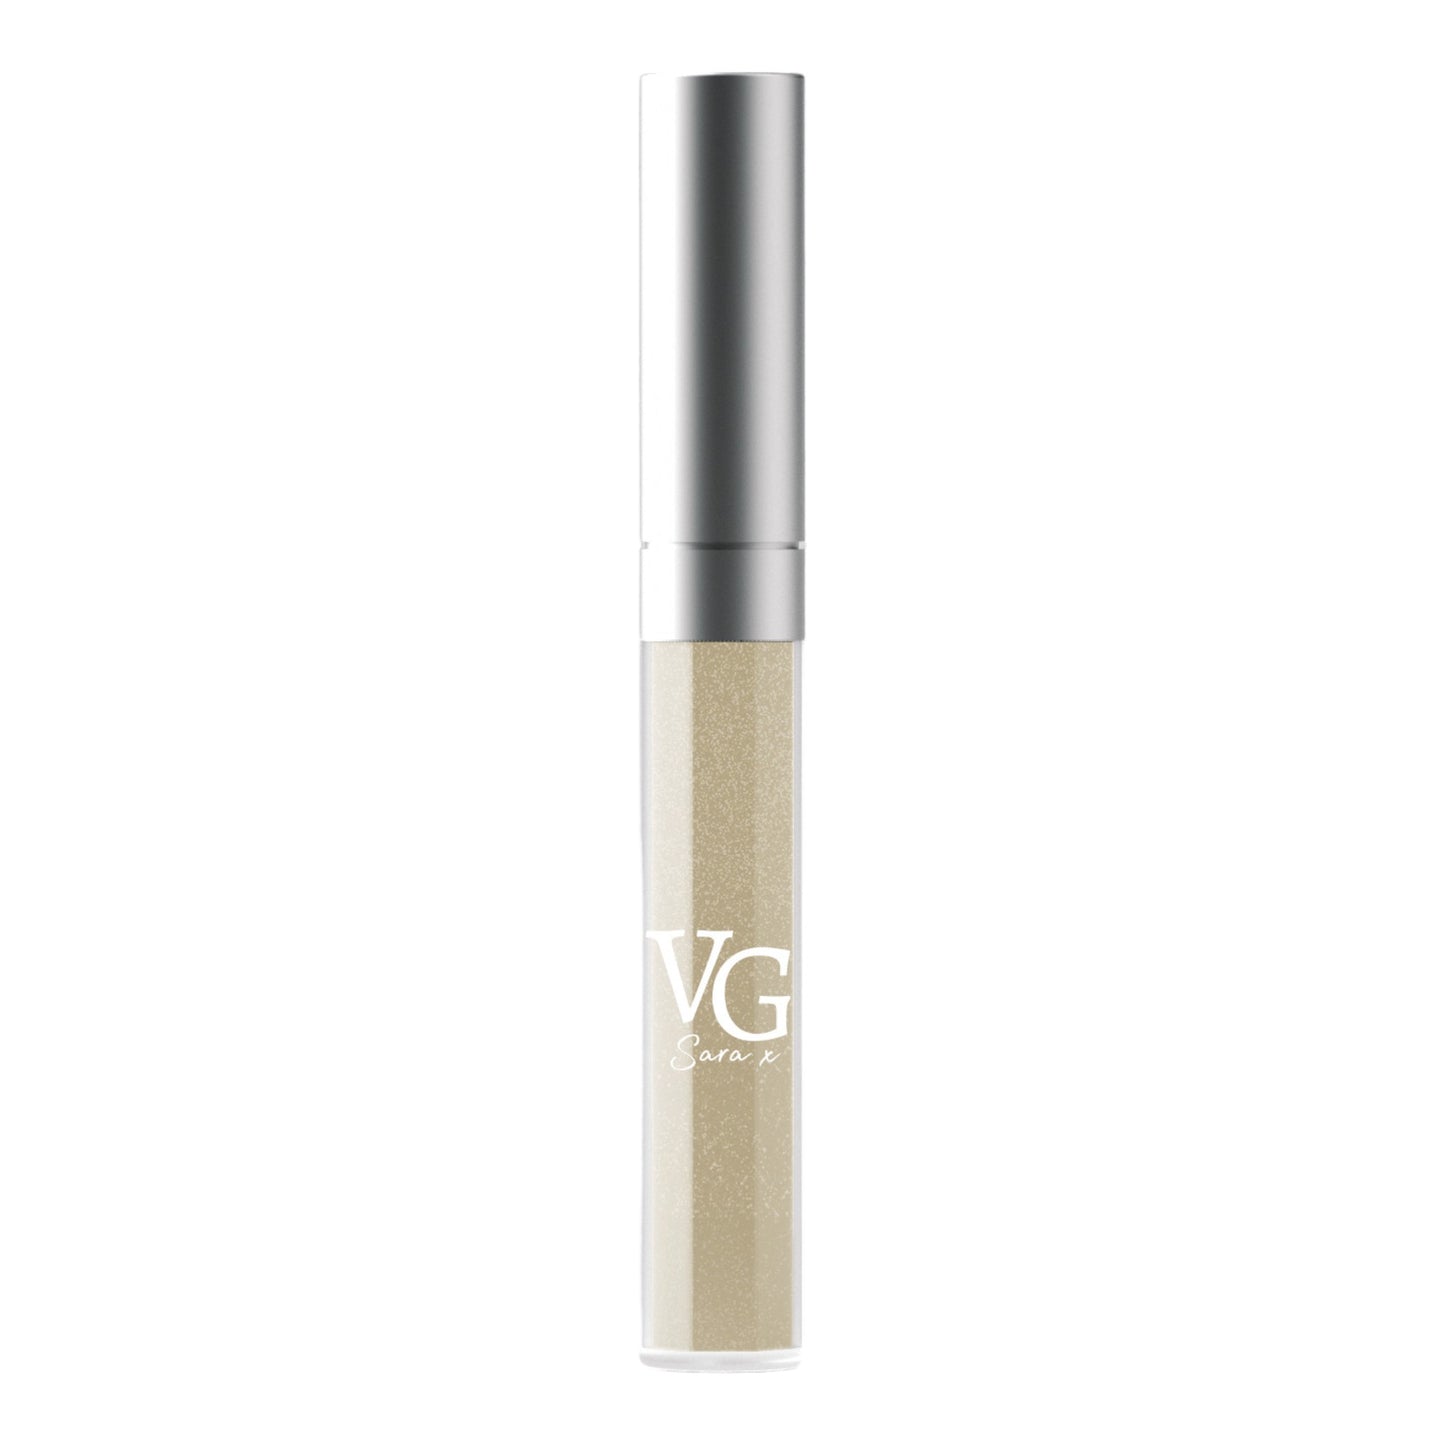 Galactic Lip Gloss encased in white with Cosmic Glow's silver emblem